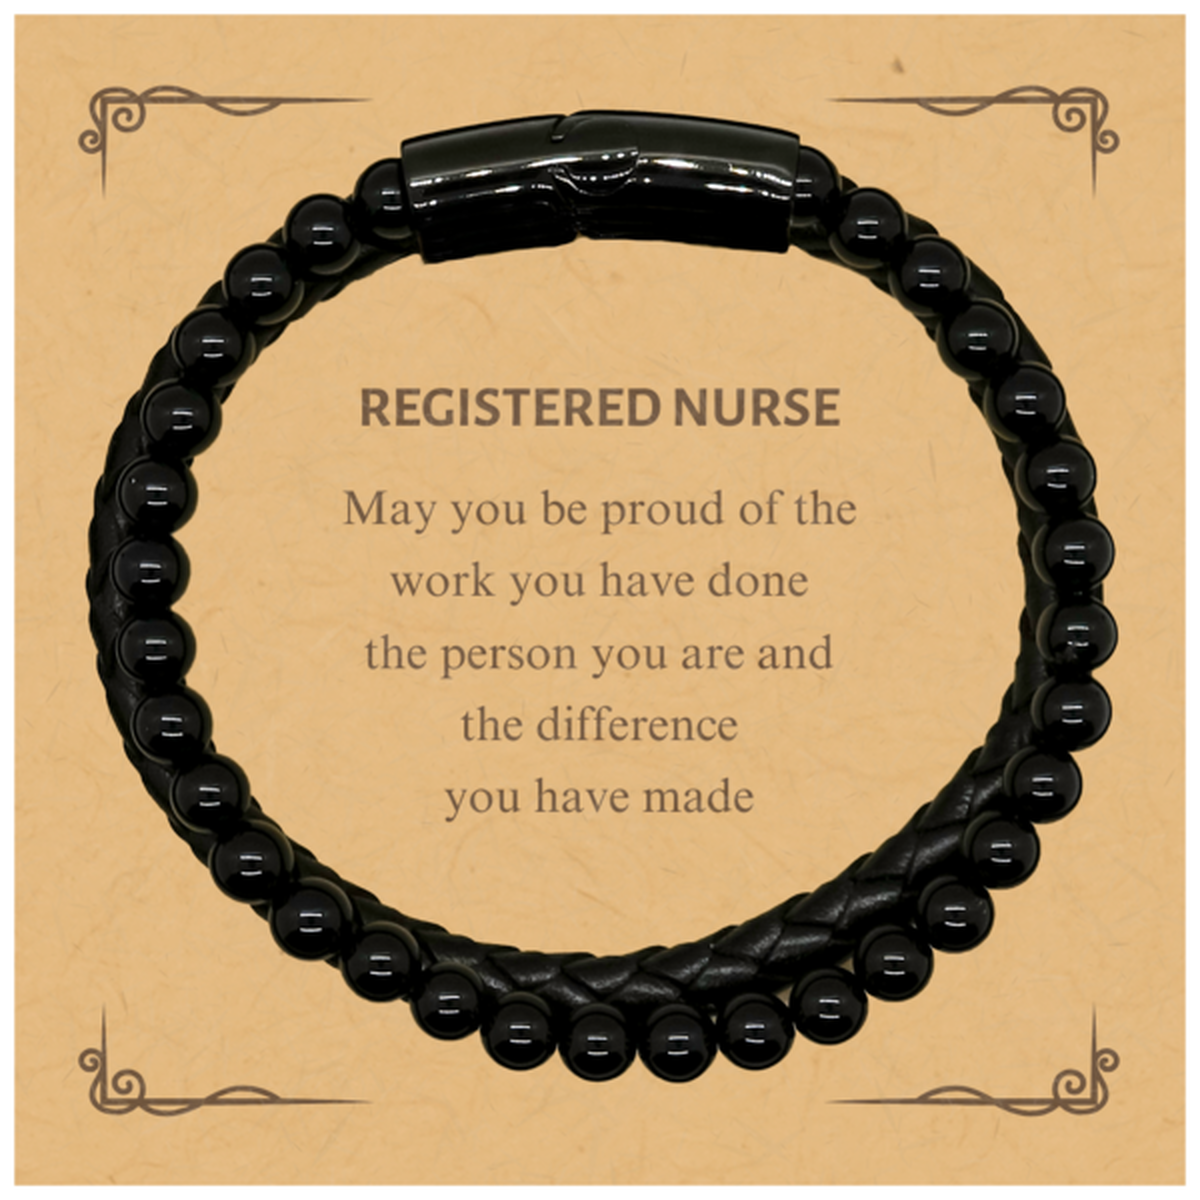 Registered Nurse May you be proud of the work you have done, Retirement Registered Nurse Stone Leather Bracelets for Colleague Appreciation Gifts Amazing for Registered Nurse